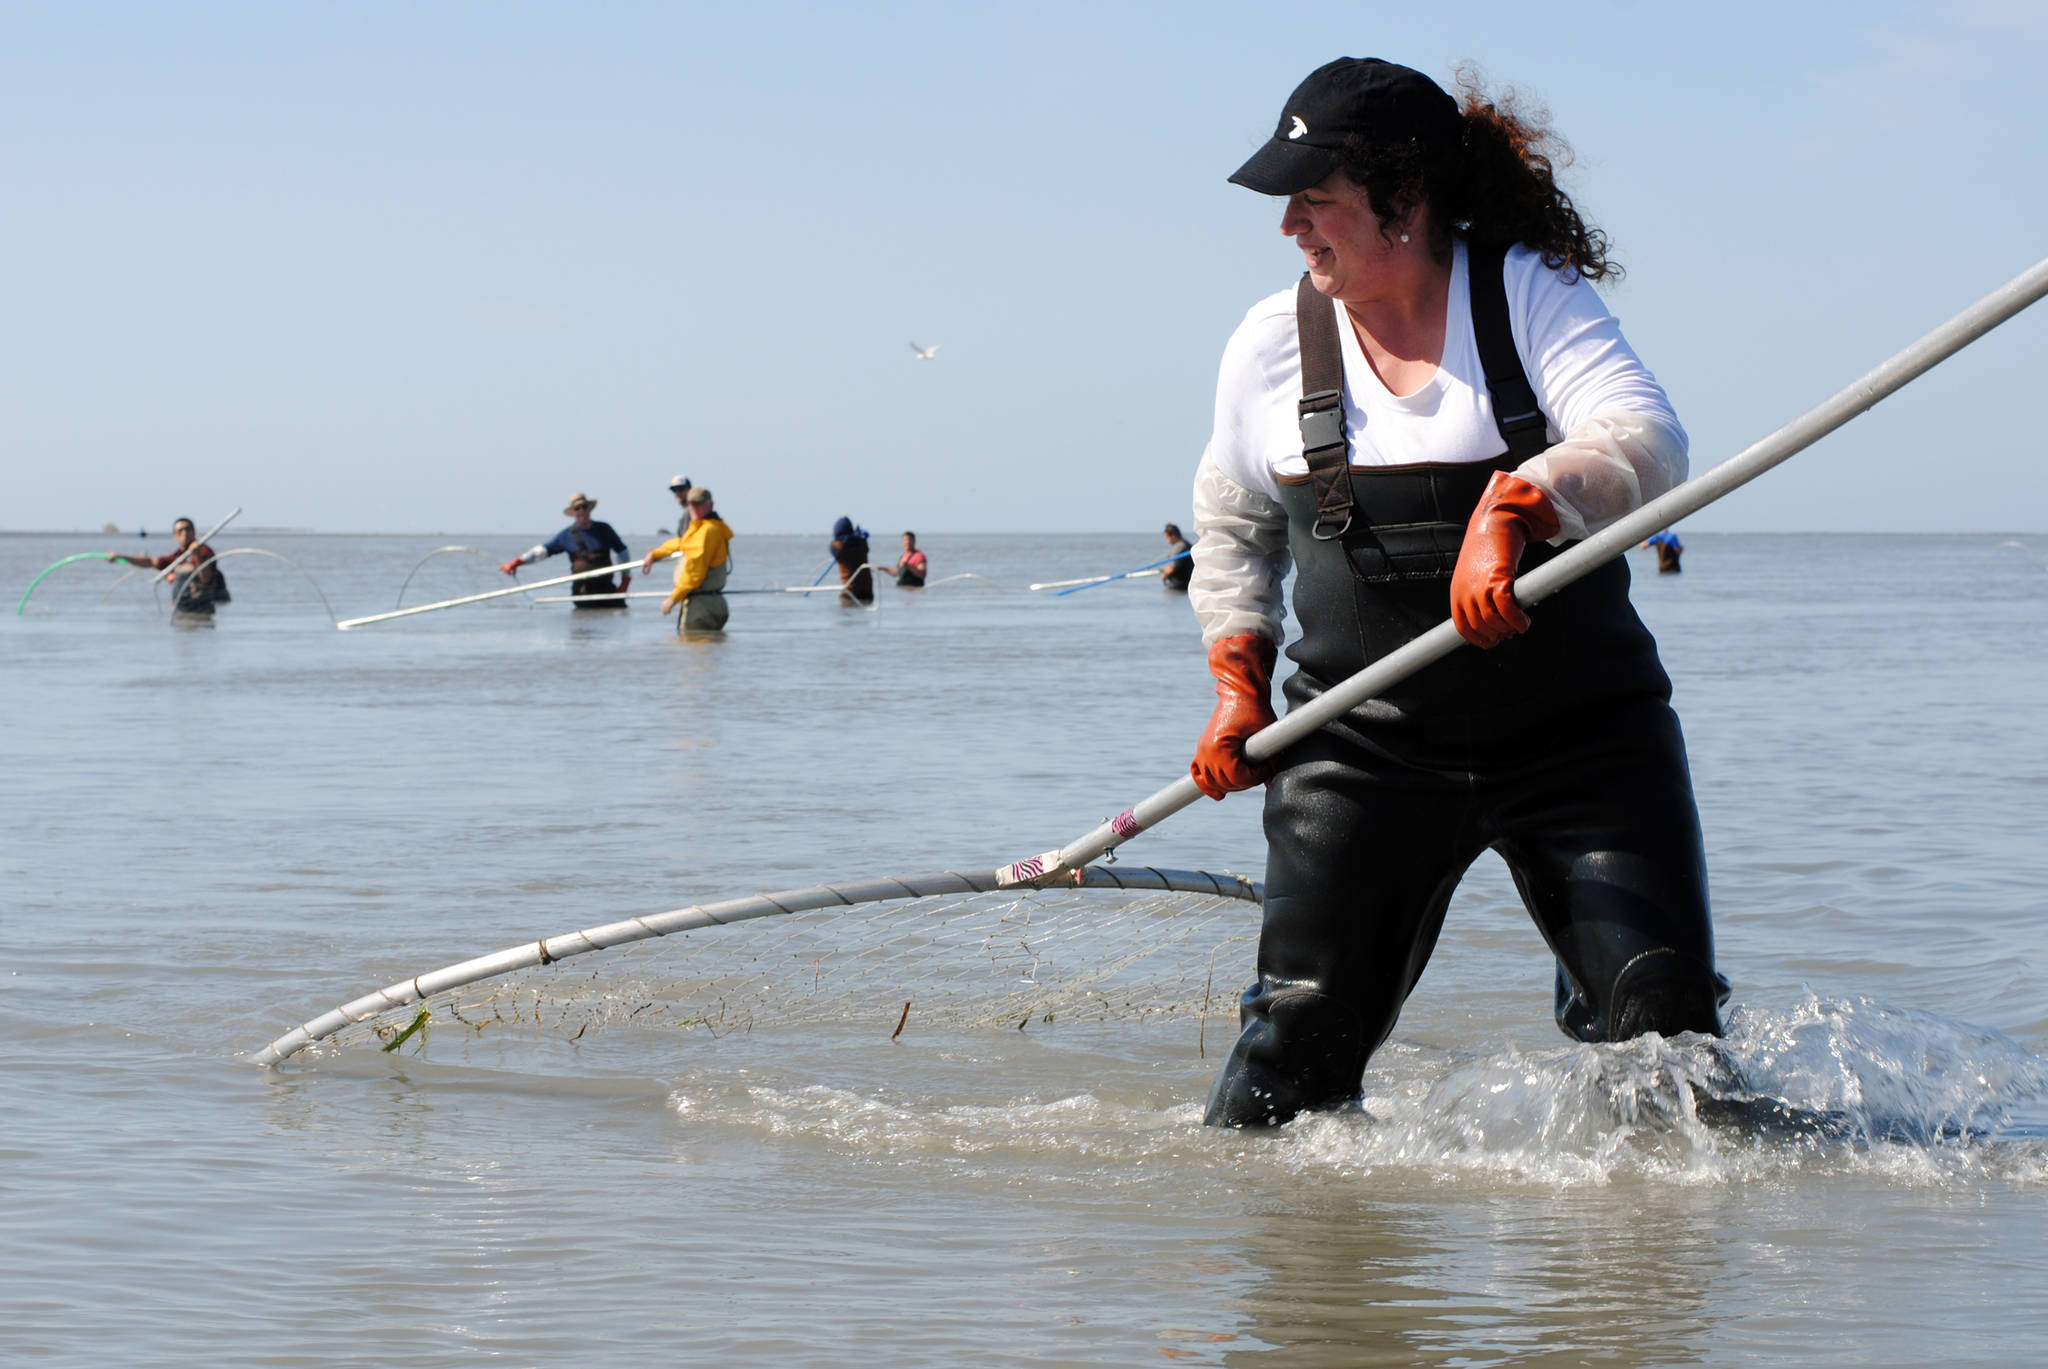 Annie Cromwell of Anchorage brings in a sockeye salmon Sunday, June 23, while dipnetting on the north beach in Kenai, Alaska. (Photo by Kat Sorensen/Peninsula Clarion)